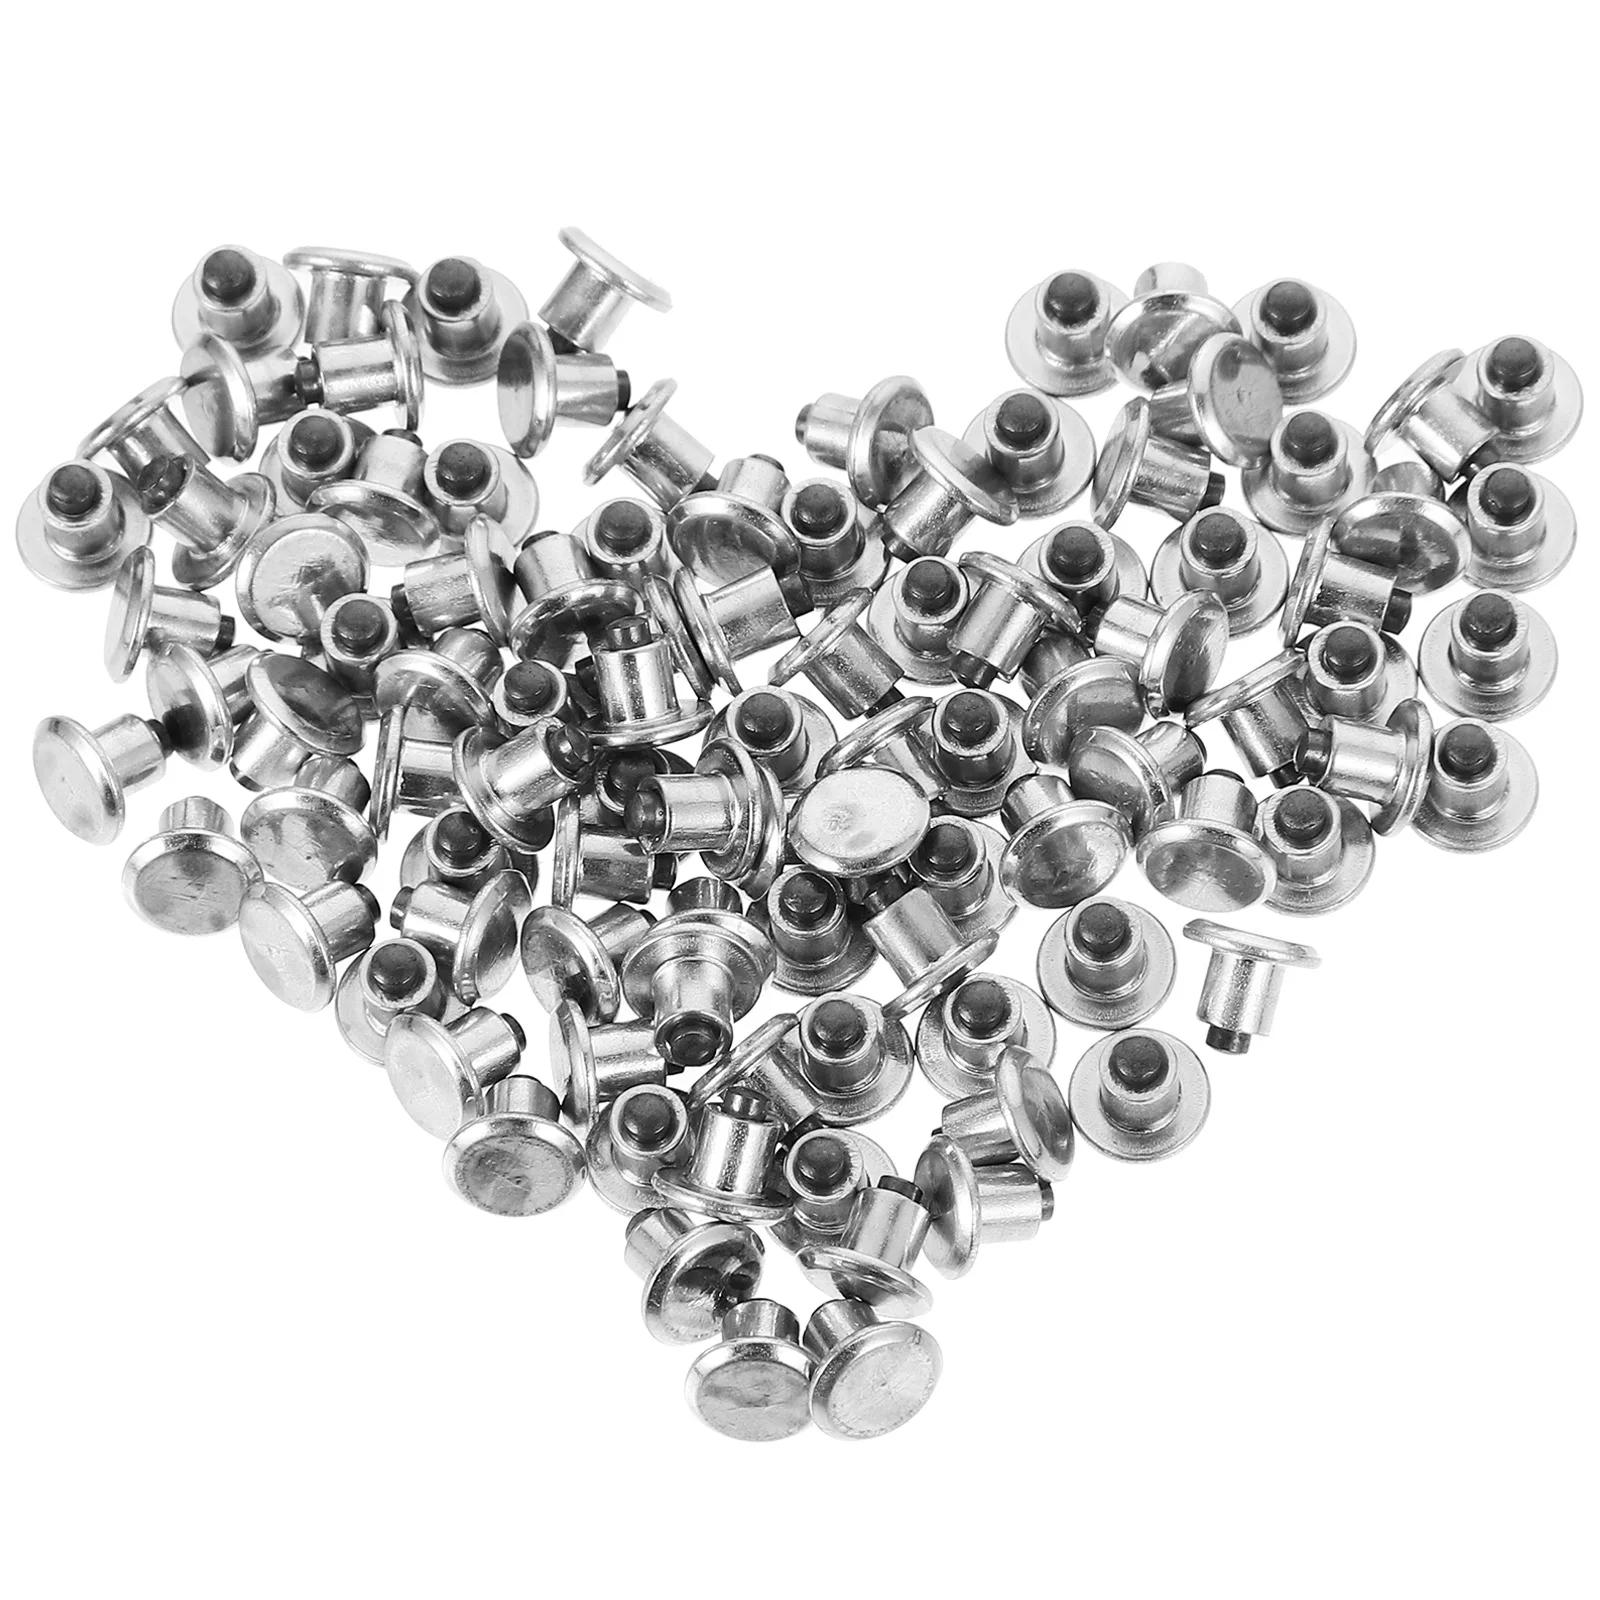 

100 Pcs Auto Tire Stud Bicycle Tires Spikes Car Truck SUV Studs Wheel Motorcycle Screw